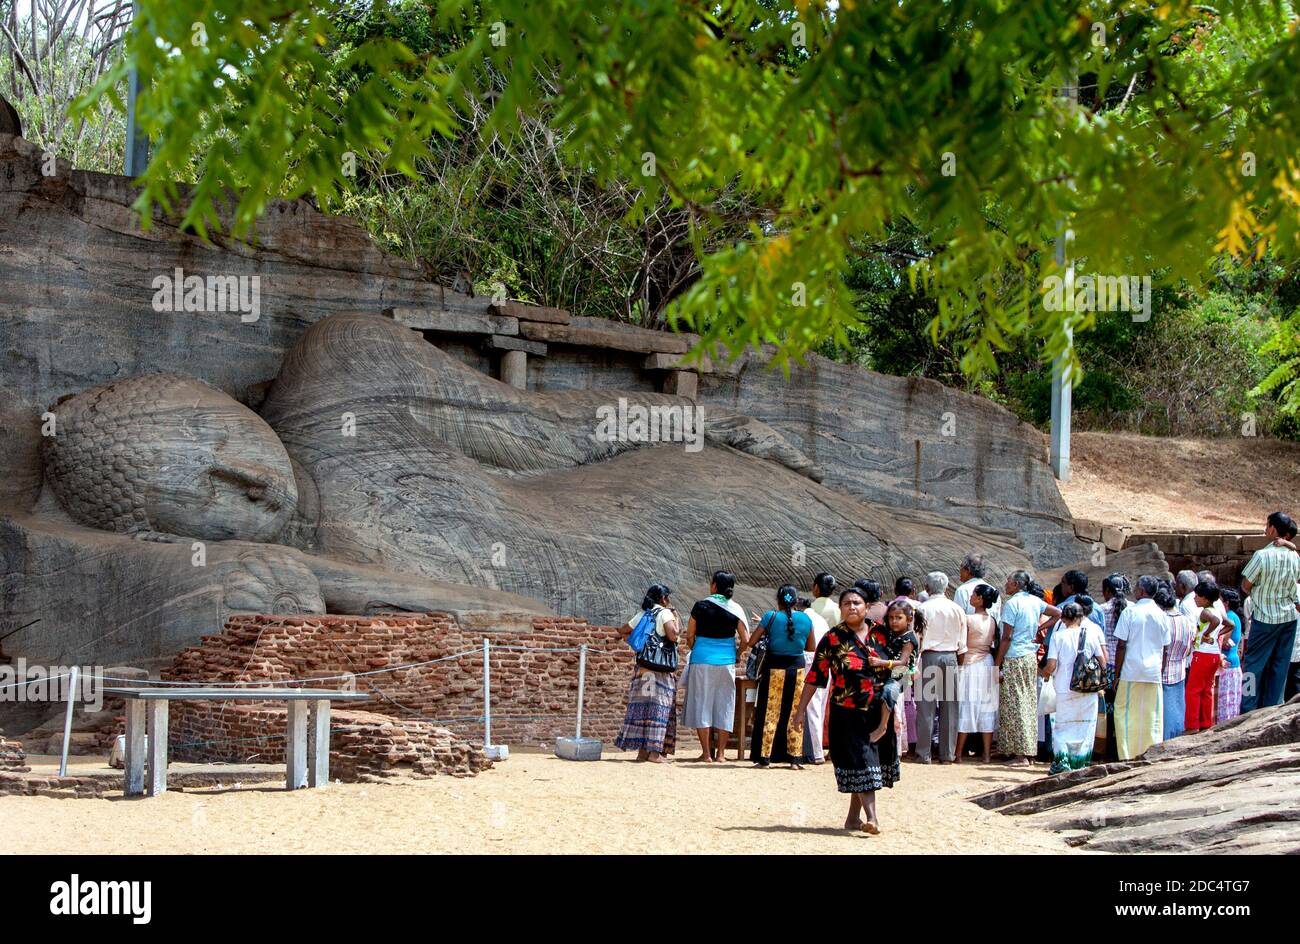 The Gal Vihara includes a reclining, a standing and two seated Buddha statues carved out of a single slab of granite rock at Polonnaruwa, Sri Lanka. Stock Photo